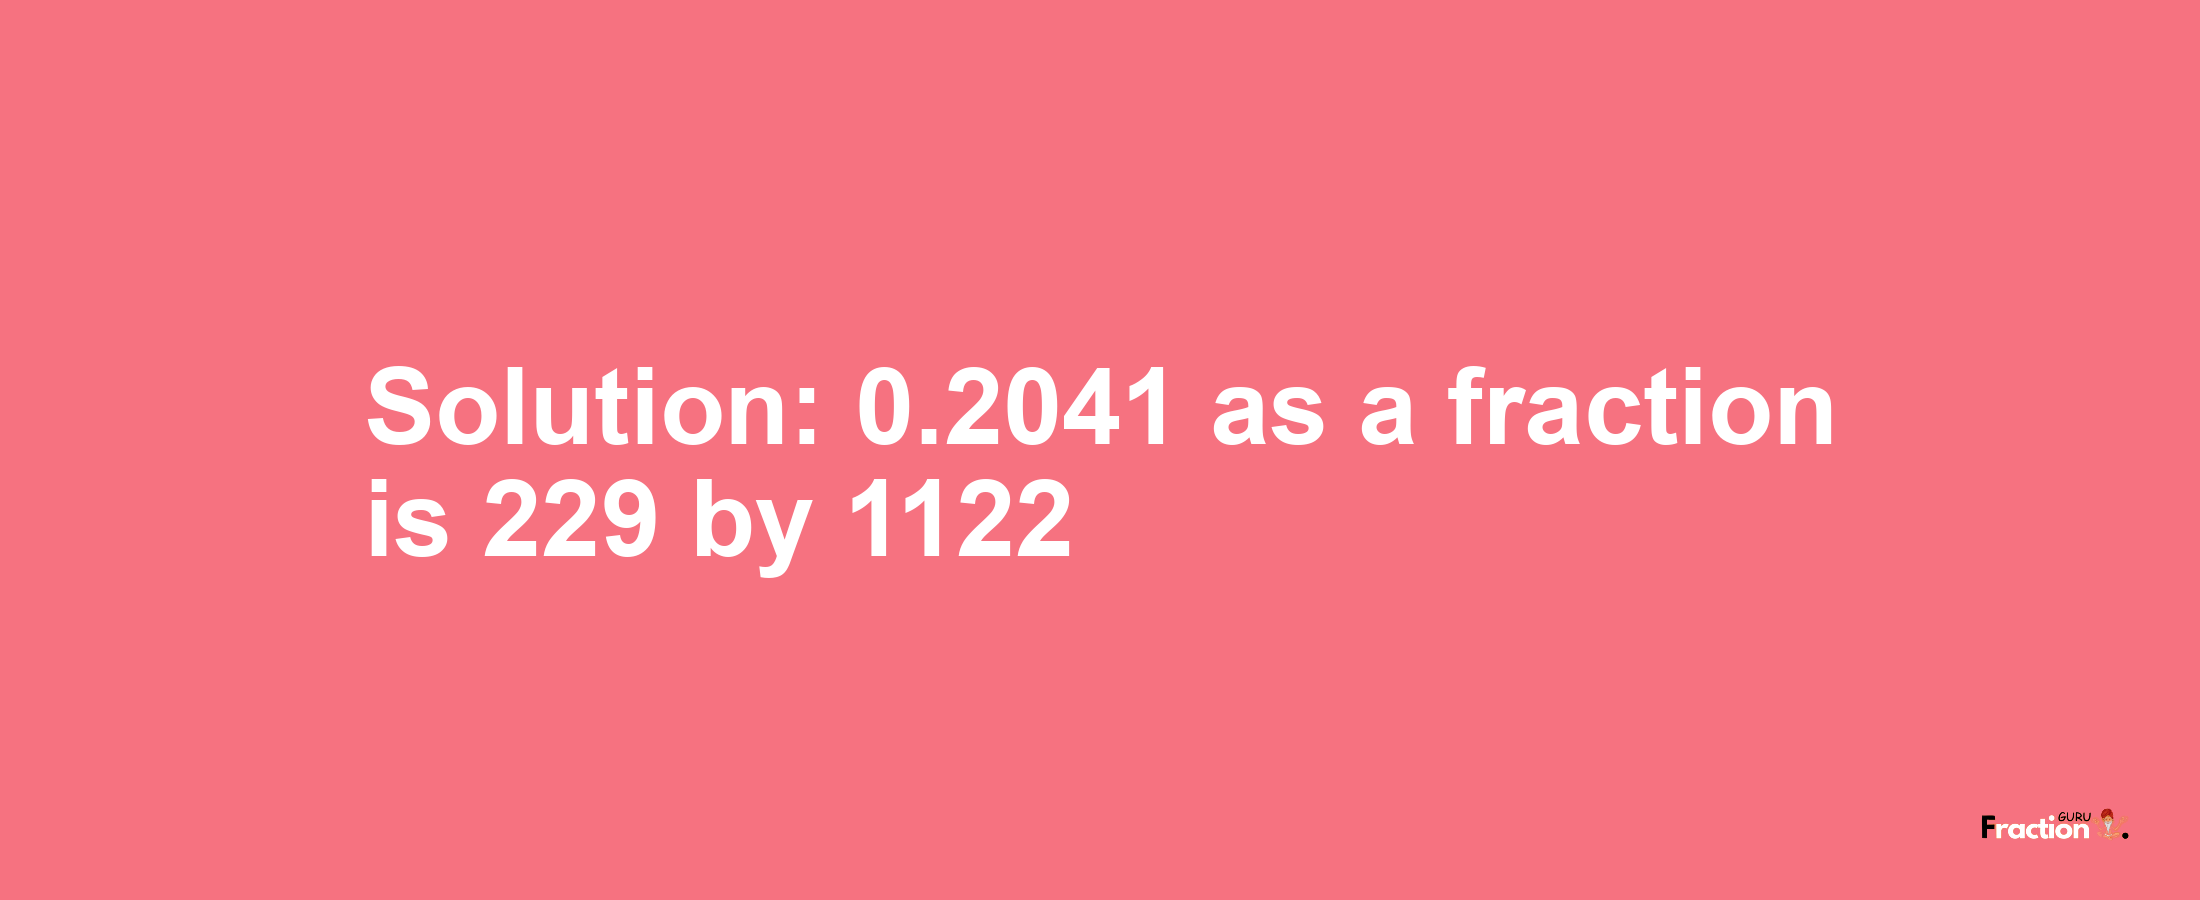 Solution:0.2041 as a fraction is 229/1122